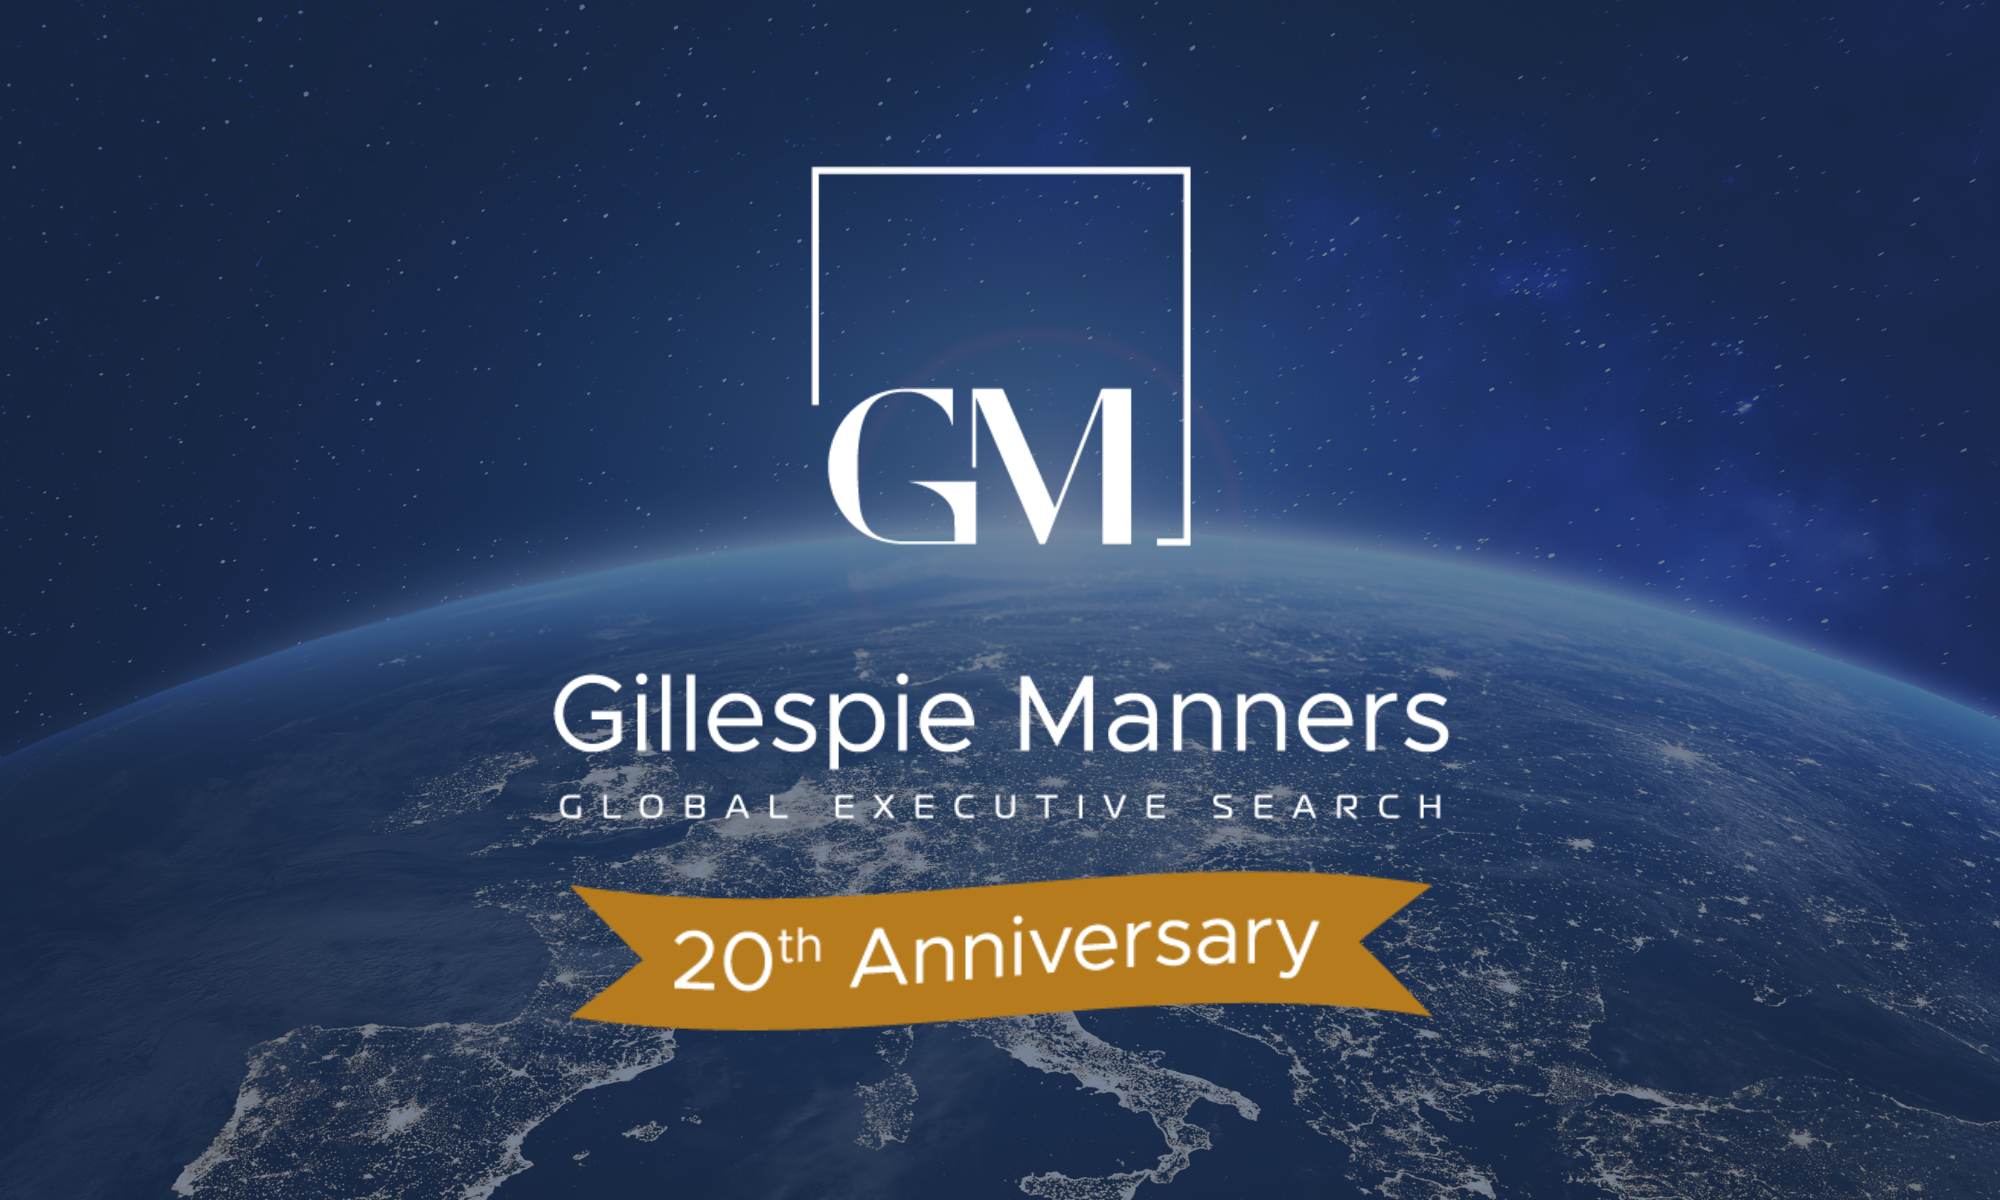 Image: Gillespie Manners Global Executive Search are honored to be shortlisted in the ‘Best Tech Recruiter’ category in the month of their 20th anniversary!